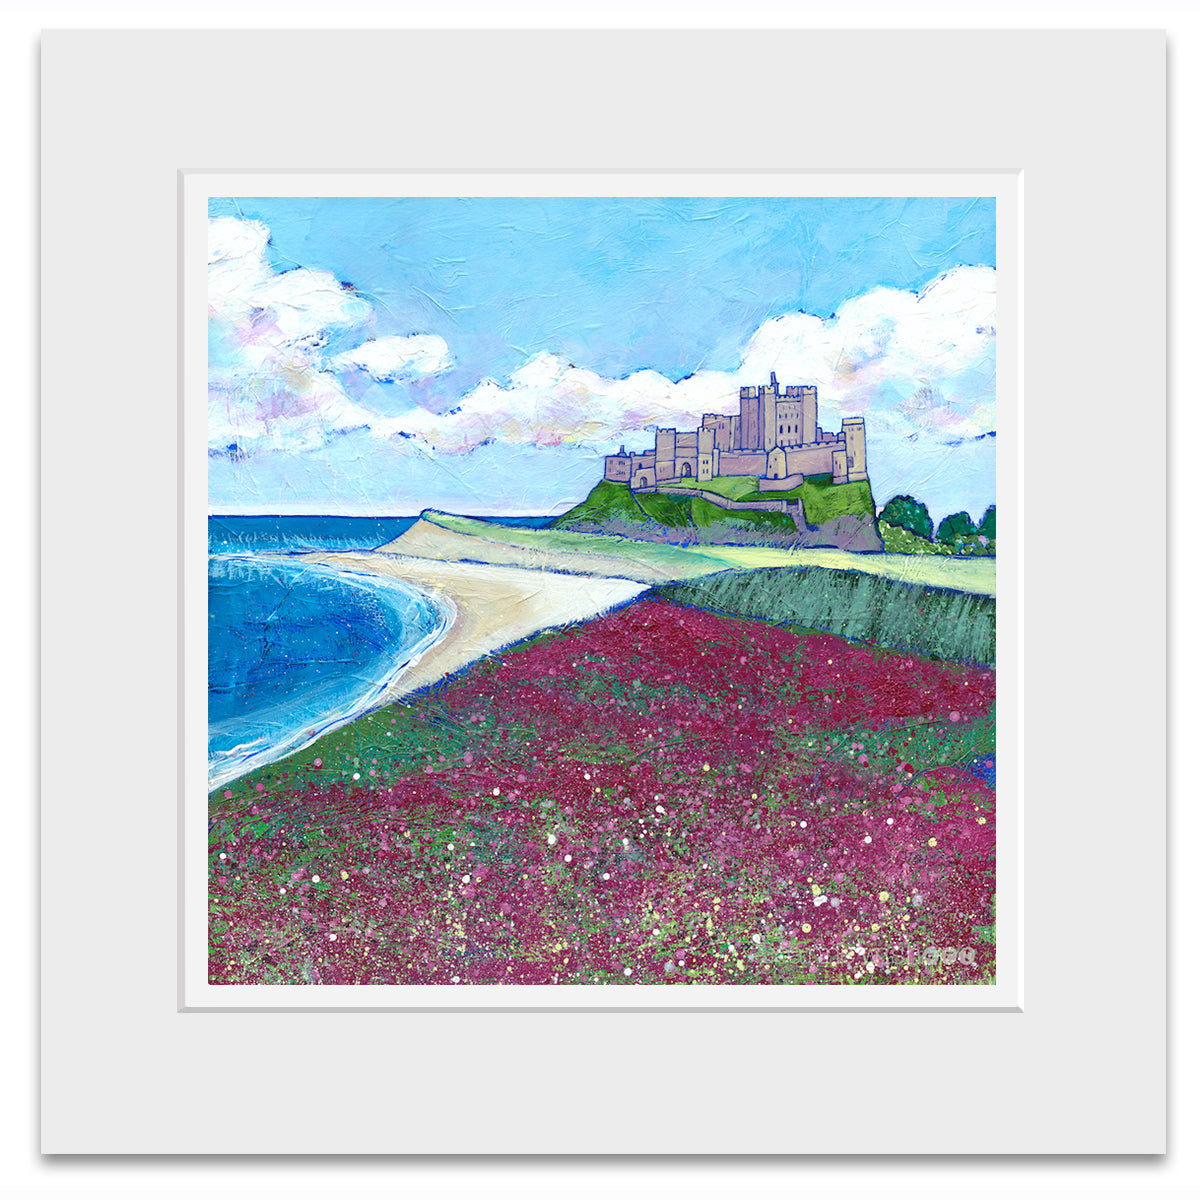 A mounted print of Bamaburgh Castle, beach and field of purple wildflowers.